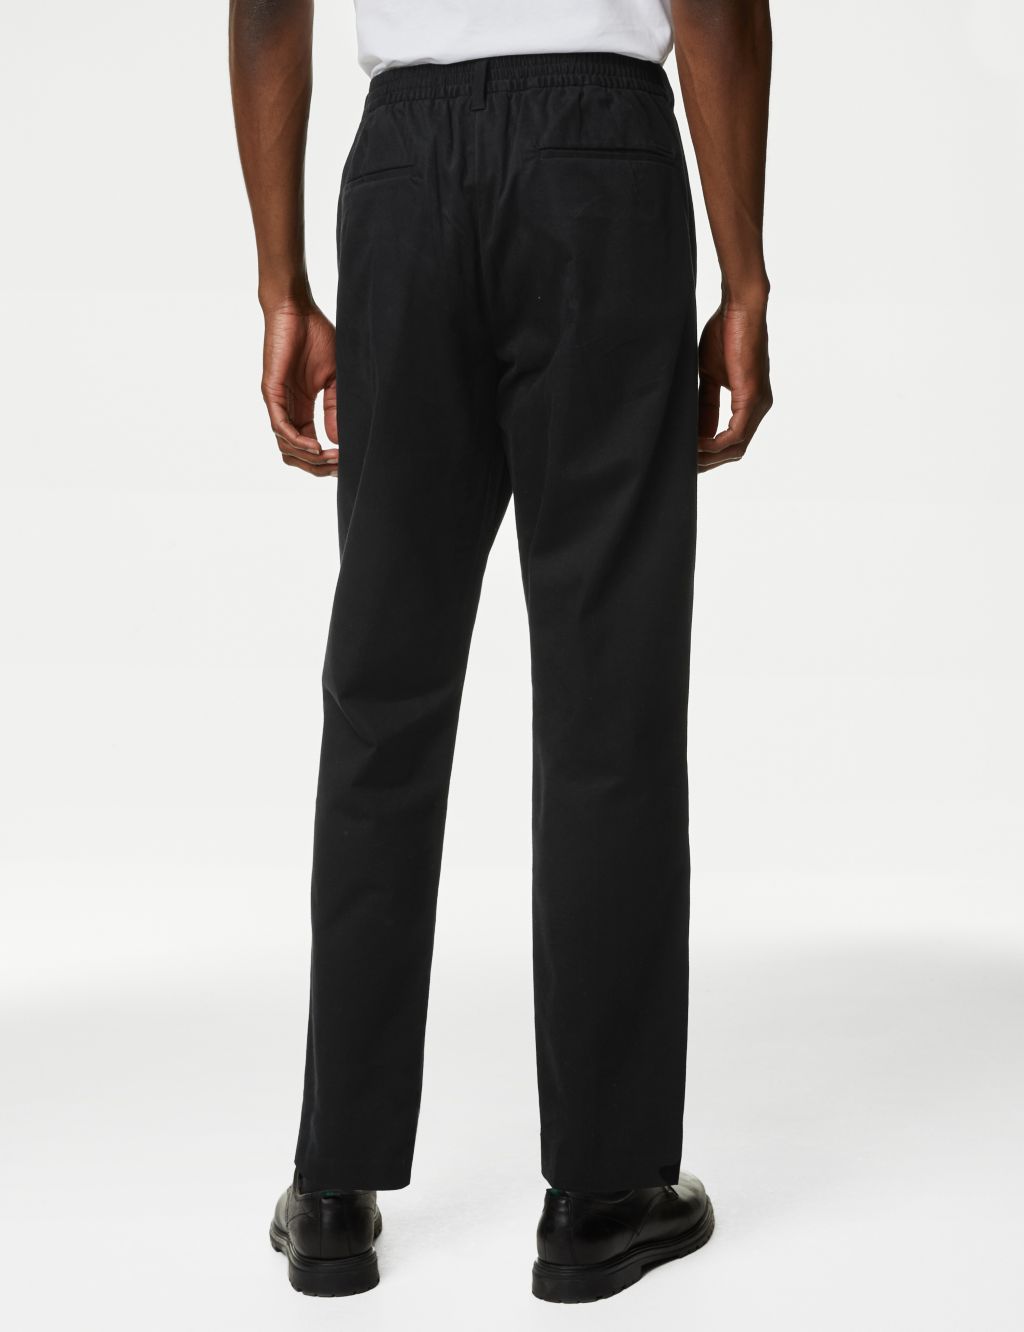 Tapered Fit Half-Elasticated Waist Chinos image 5